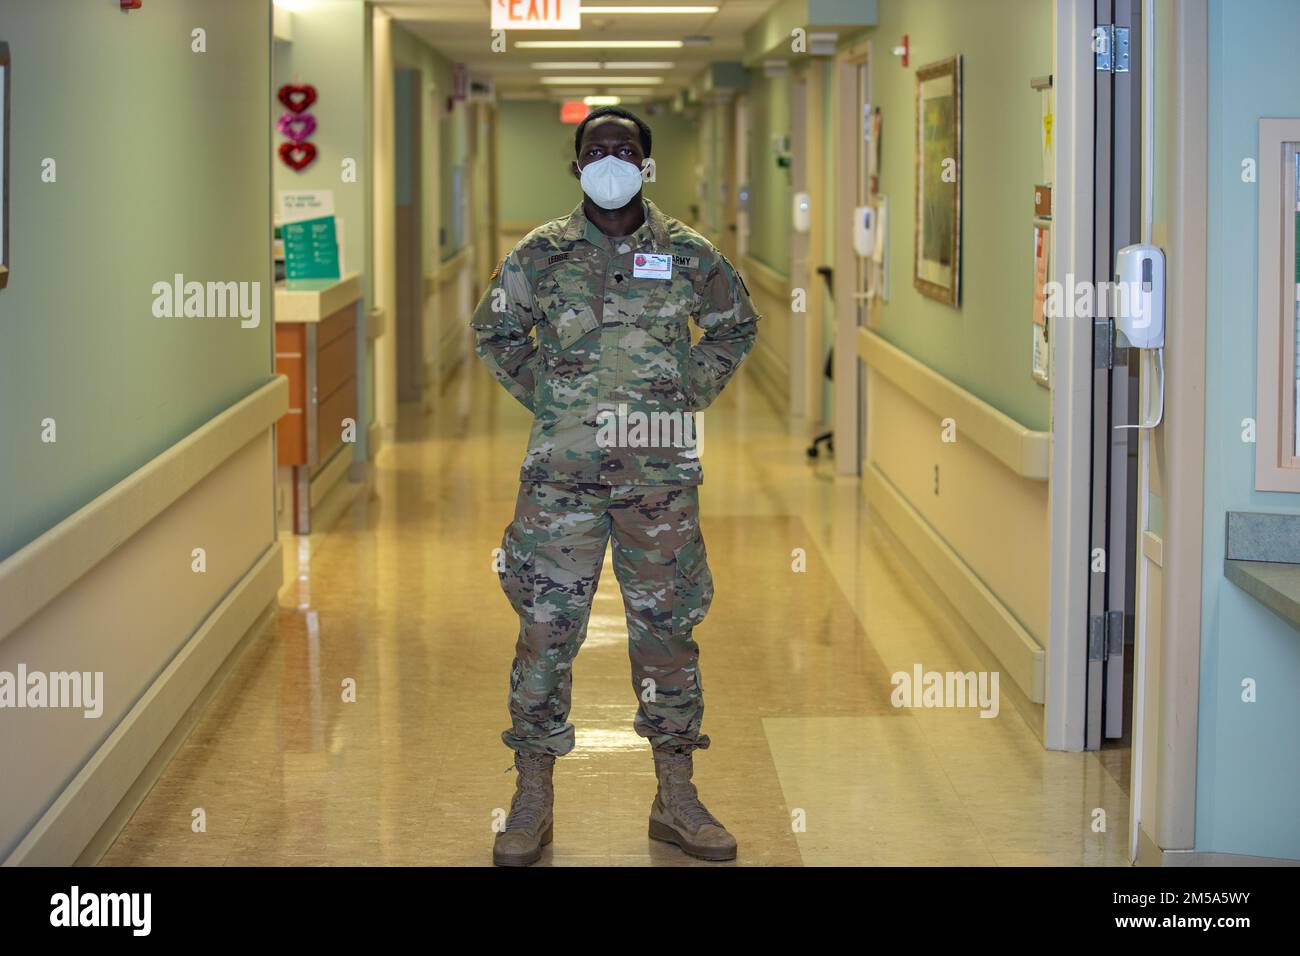 Spc. Muhammad Lebbie, an infantrymen with the 1st Battalion, 175th Infantry Regiment C Company, poses for a photo at Doctors Community Hospital Luminous in Lanham, Maryland, on Feb. 14, 2022. Lebbie is proud of his service and wants to do all he can to help end the COVID-19 pandemic. At the direction of Gov. Larry Hogan, up to 1,000 MDNG members were activated to assist state and local health officials with their COVID-19 response to include the distribution of COVID-19 test kits, 20 million KN95 and N95 masks, and other personal protective equipment and to provide support to skilled nursing f Stock Photo